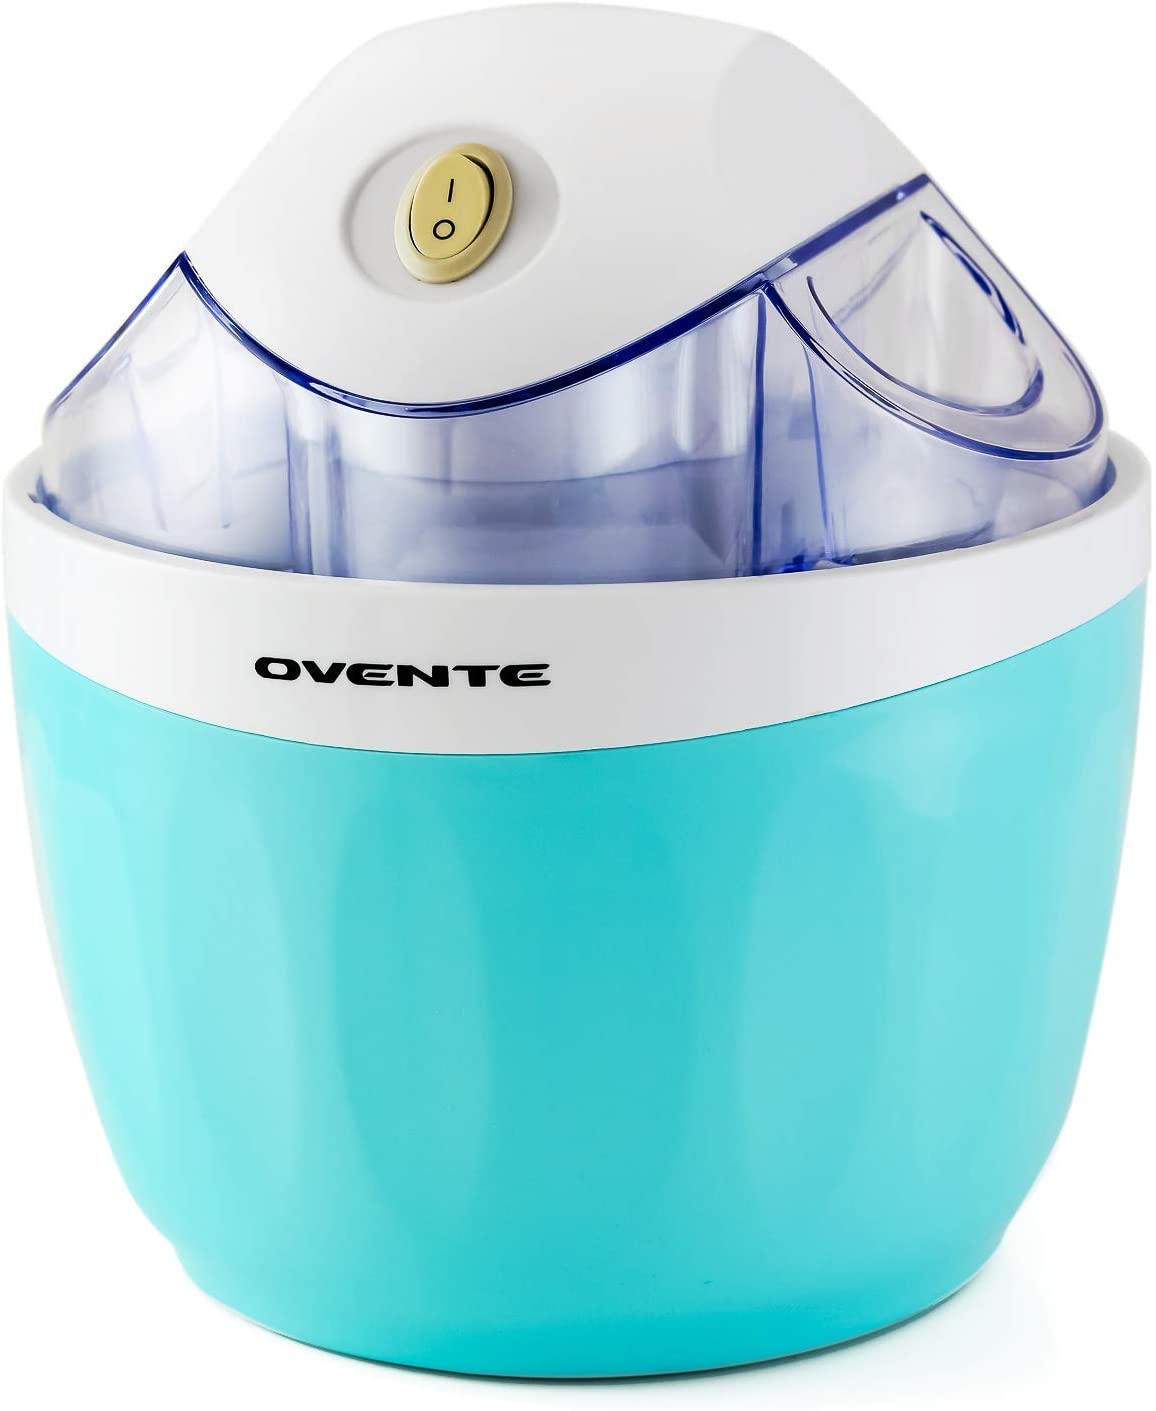 Electric Ice Cream Maker for Homemade Desserts